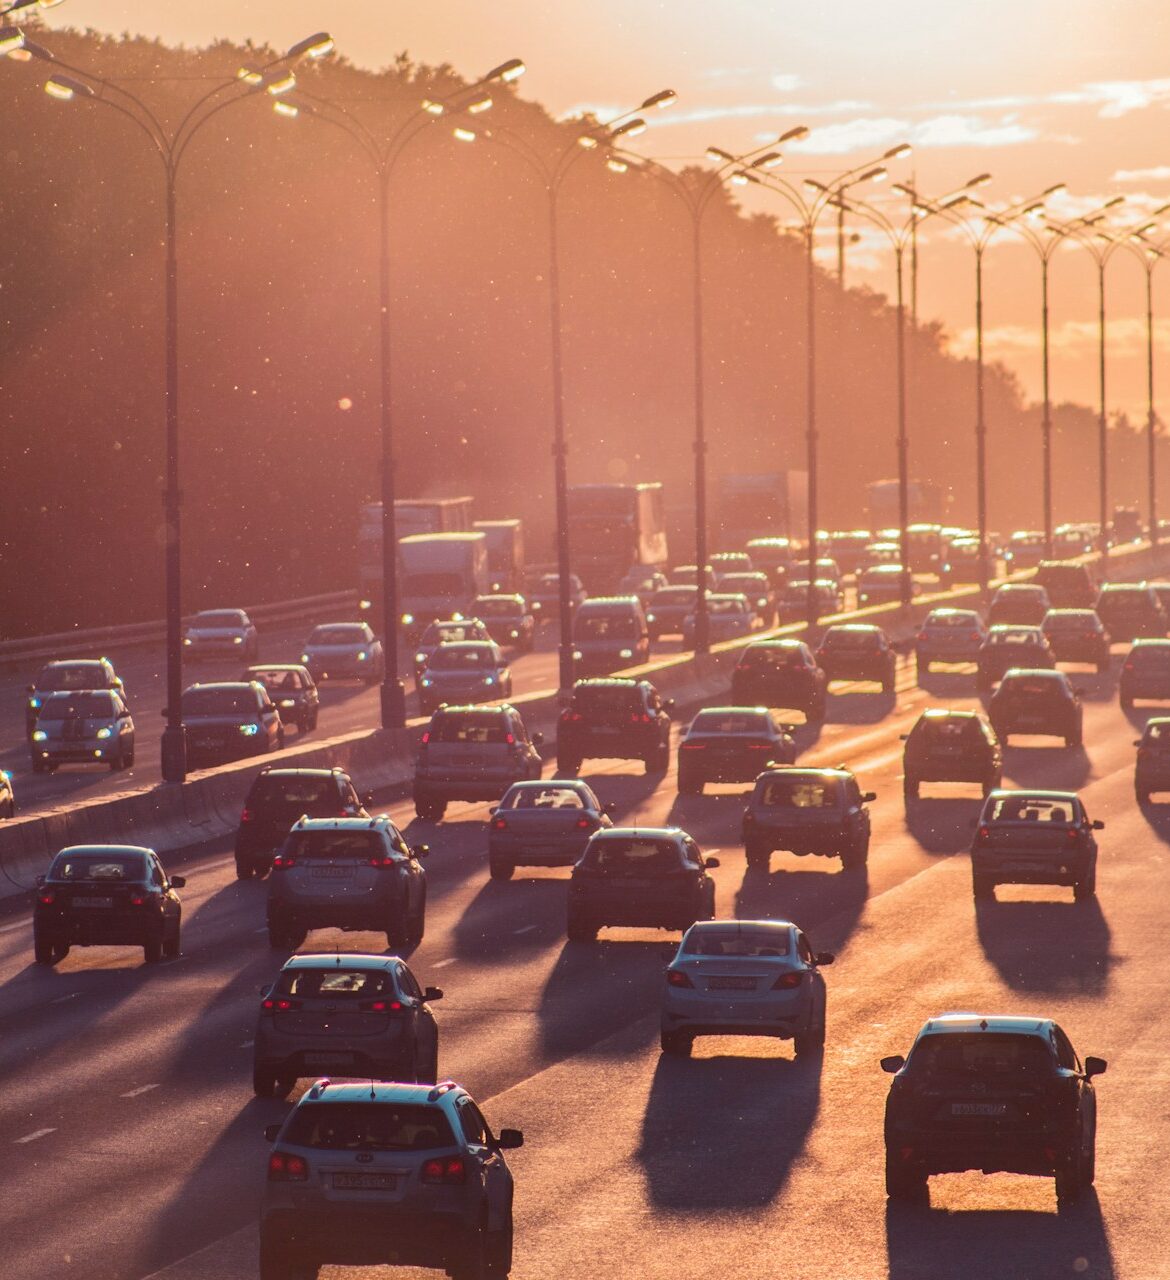 A hazy orange sunset descends over rows and rows of cars traveling down a highway